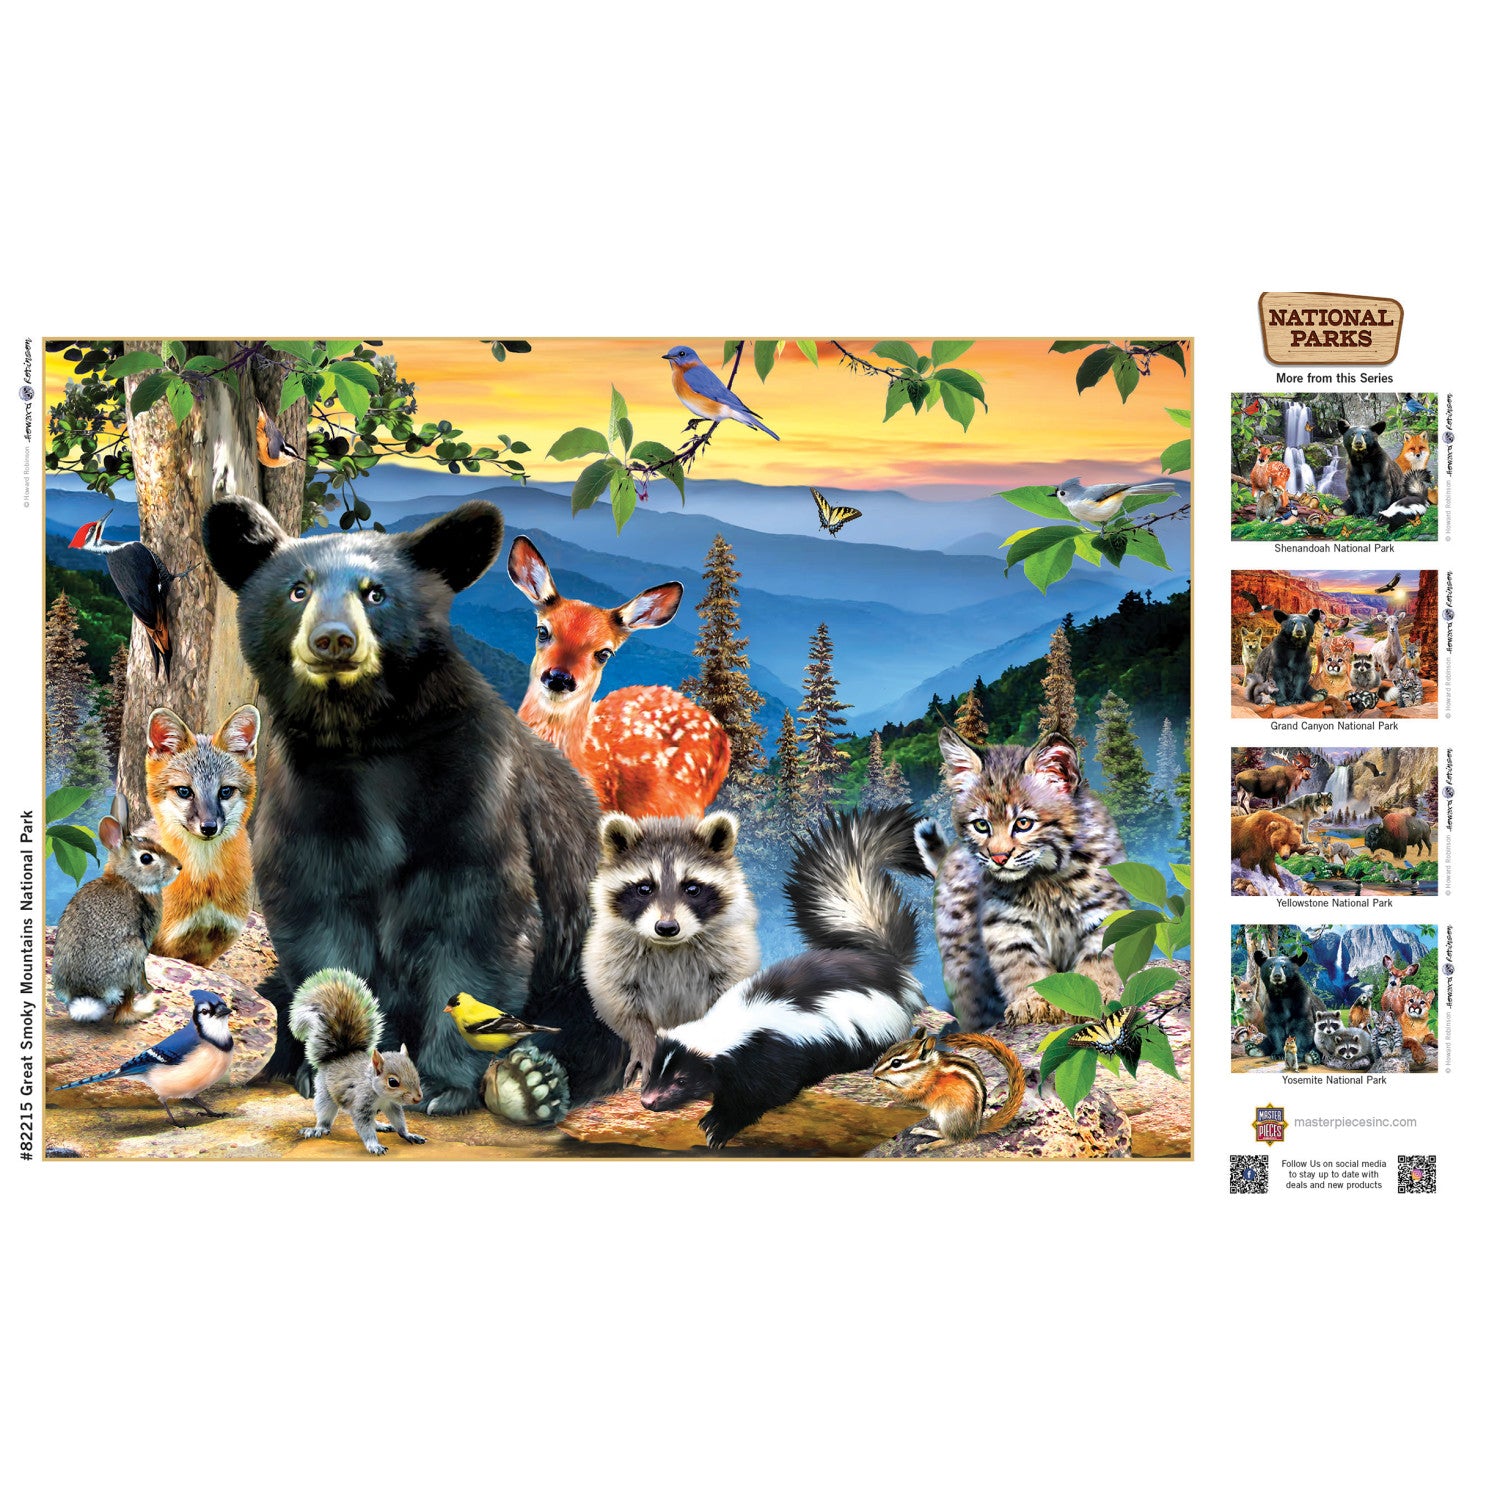 Great Smoky Mountains National Park 500 Piece Puzzle